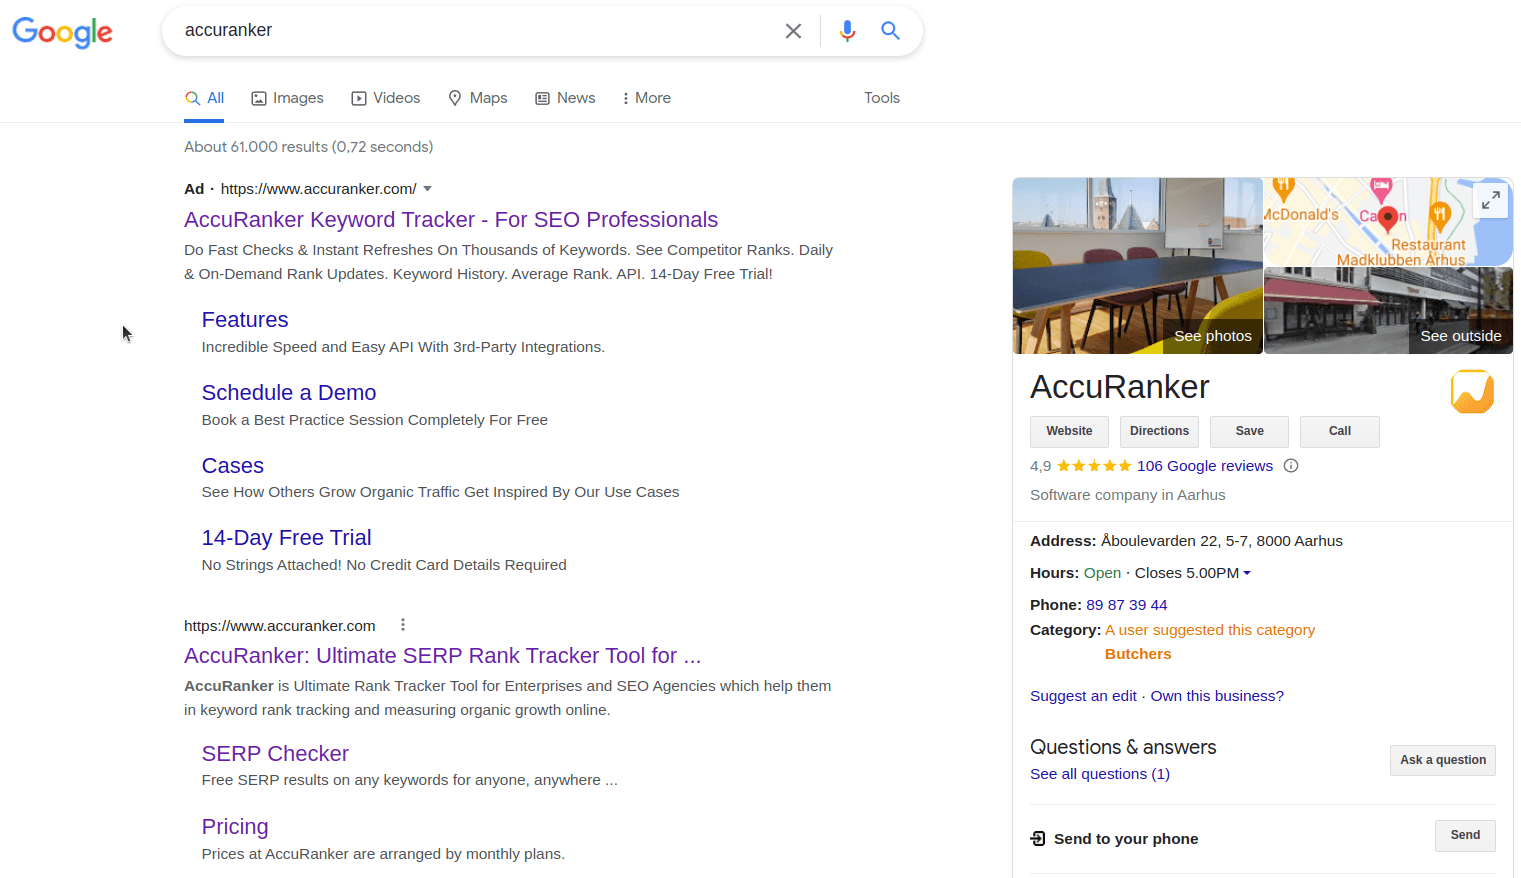 accuranker-search-google.png